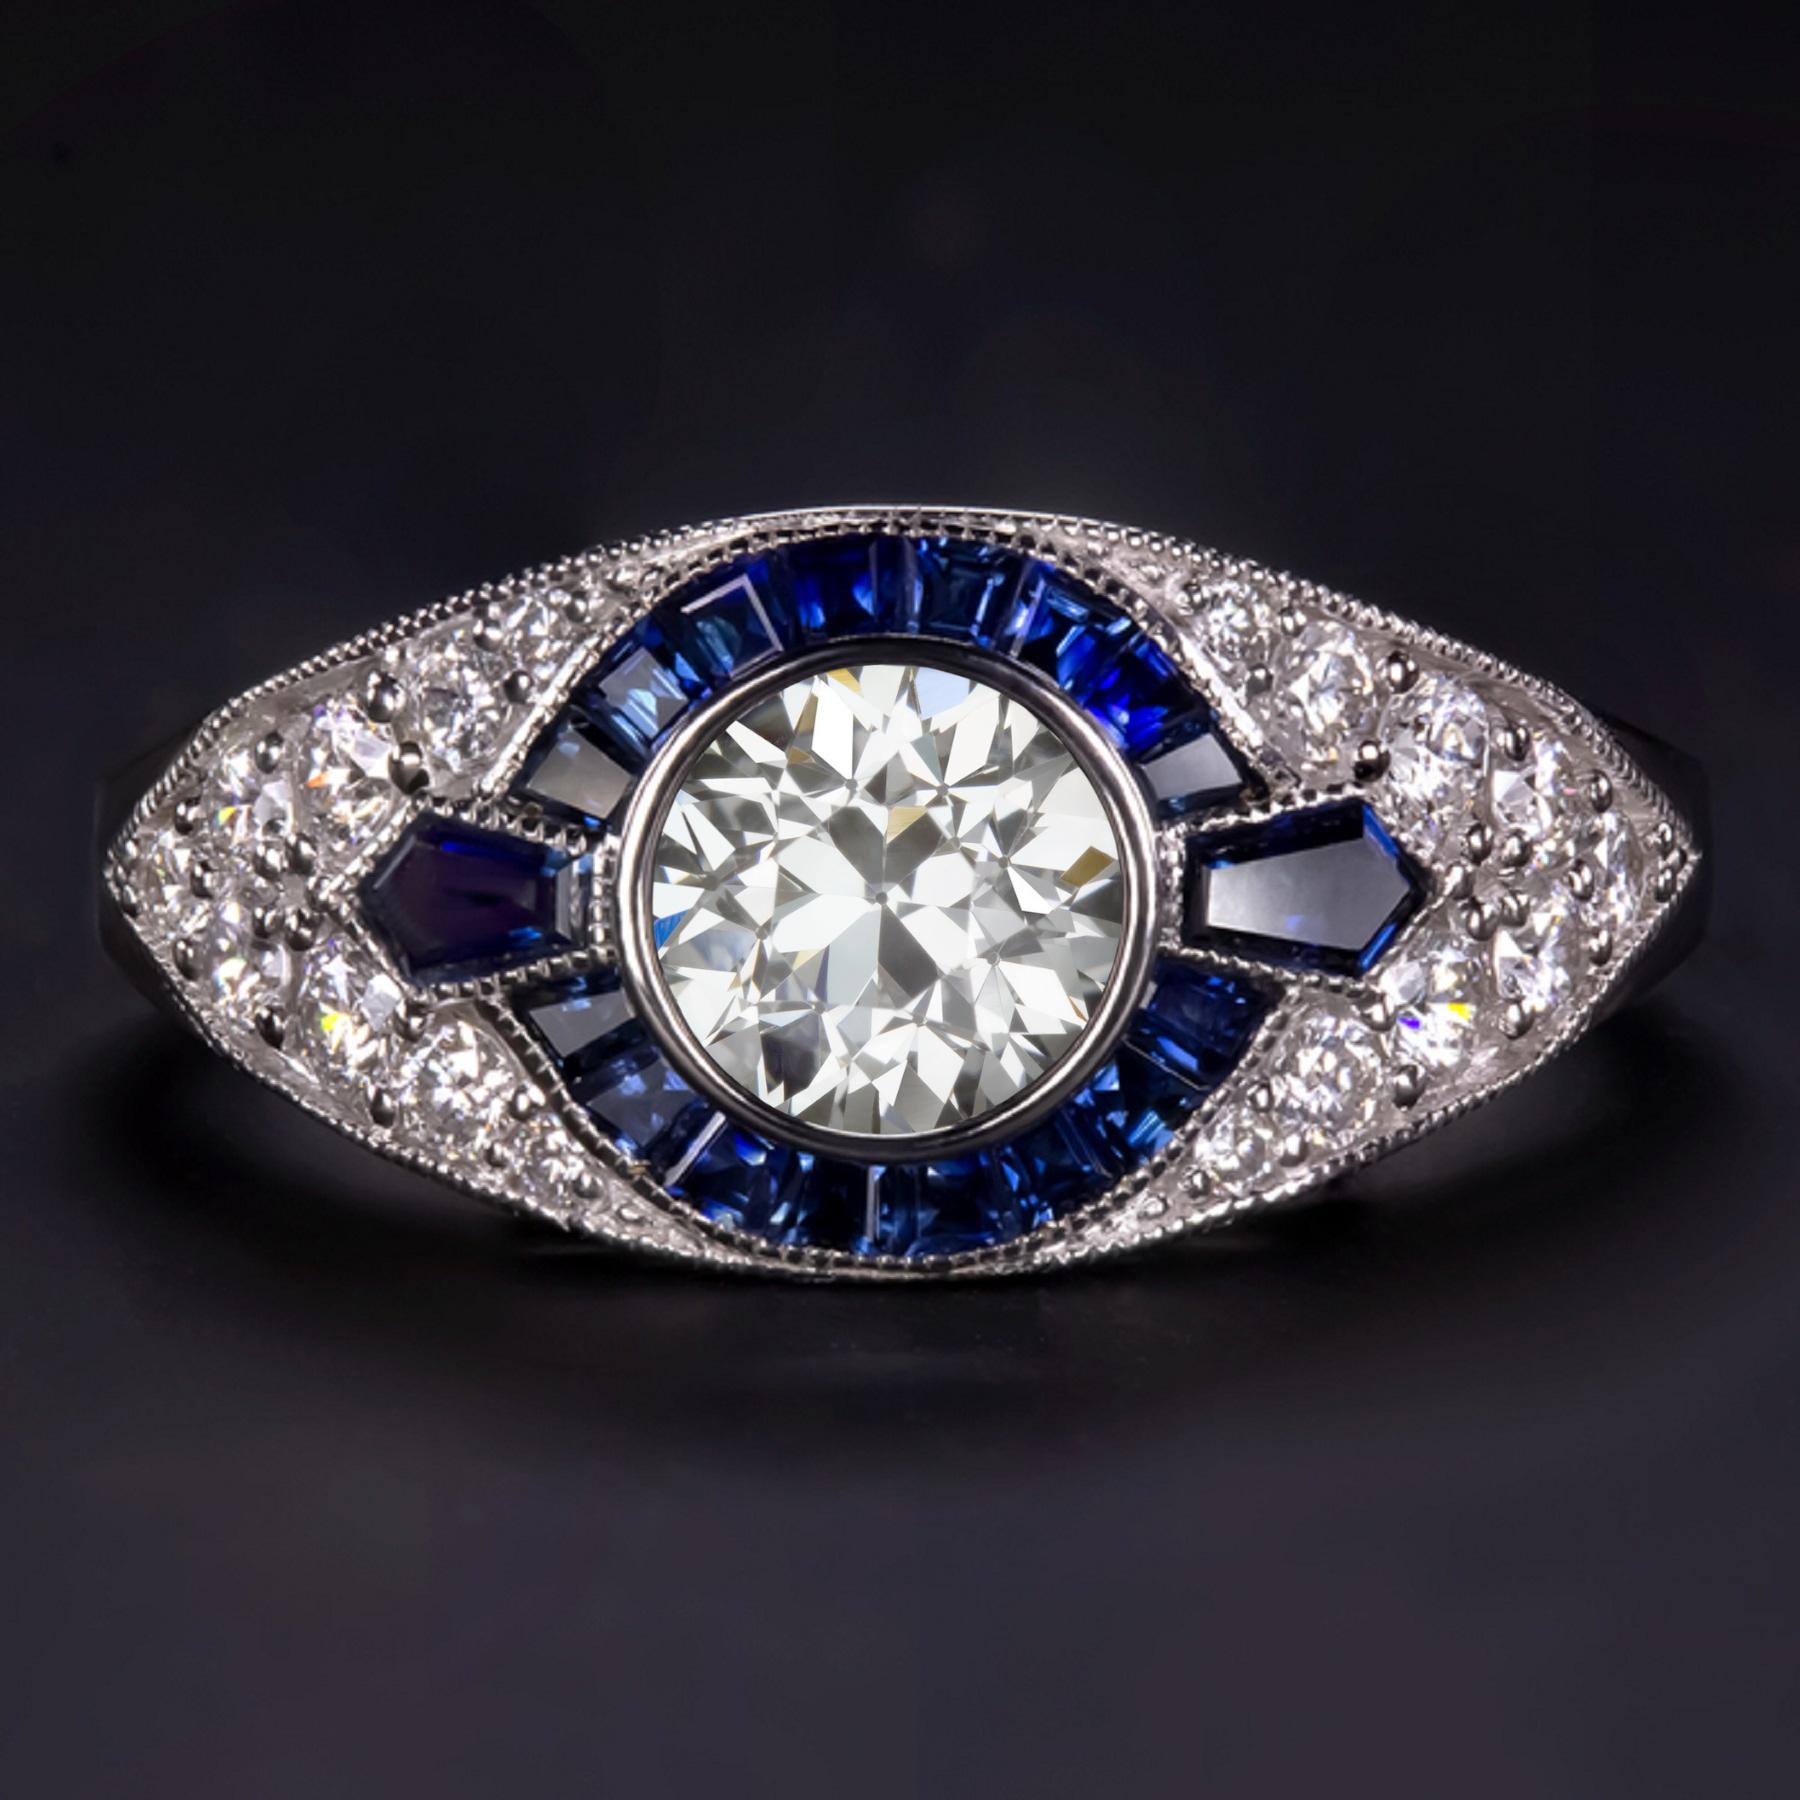 This timeless diamond blue sapphire cocktail ring combines bright sparkle, rich color, and a romantic design.

The main stone is an old transitional cut GIA certified diamond has bright white F color, a completely eye clean, lively sparkle, and